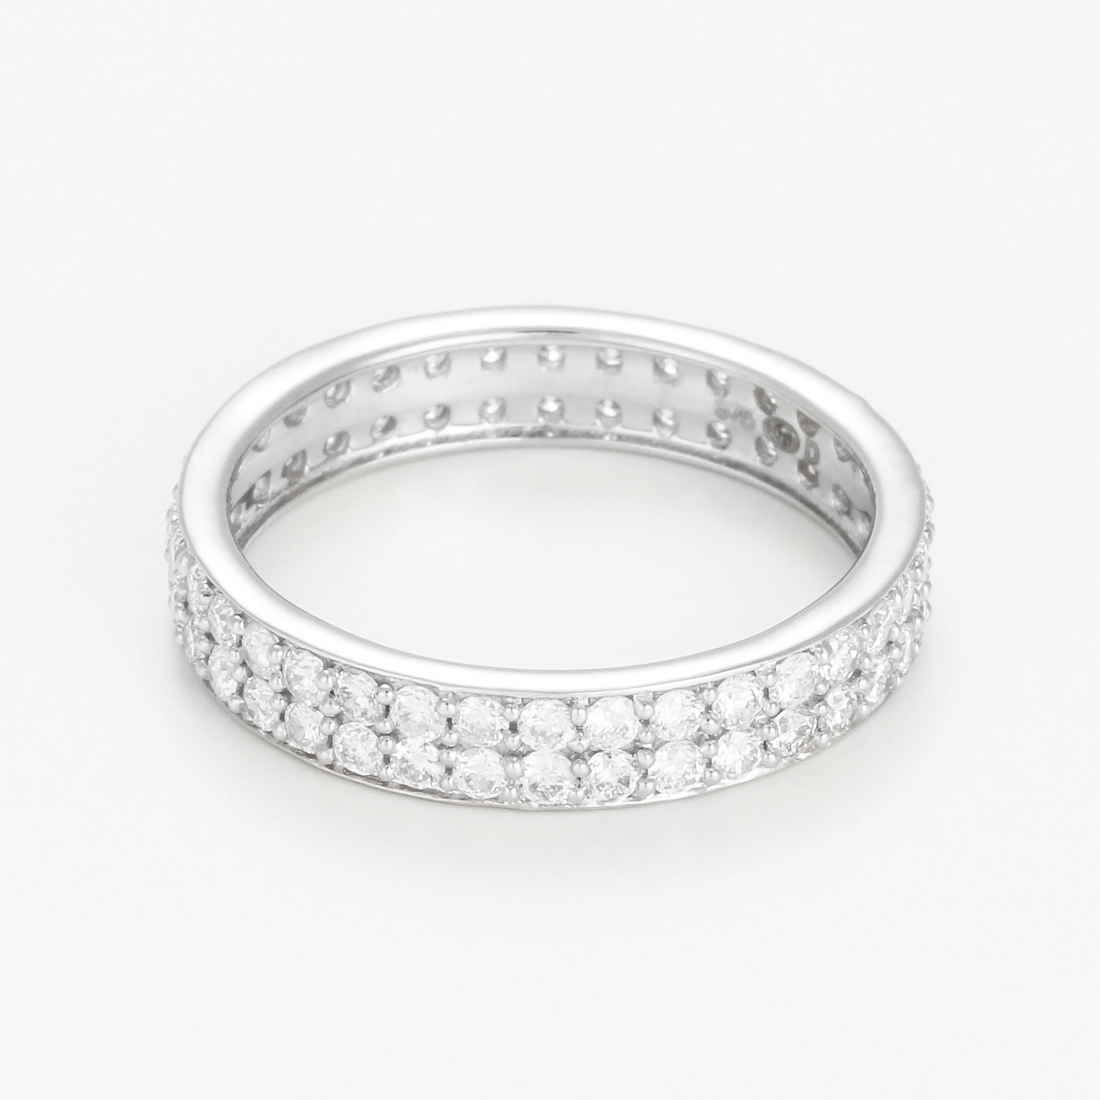 Women's 'Double Tour Complet' Ring